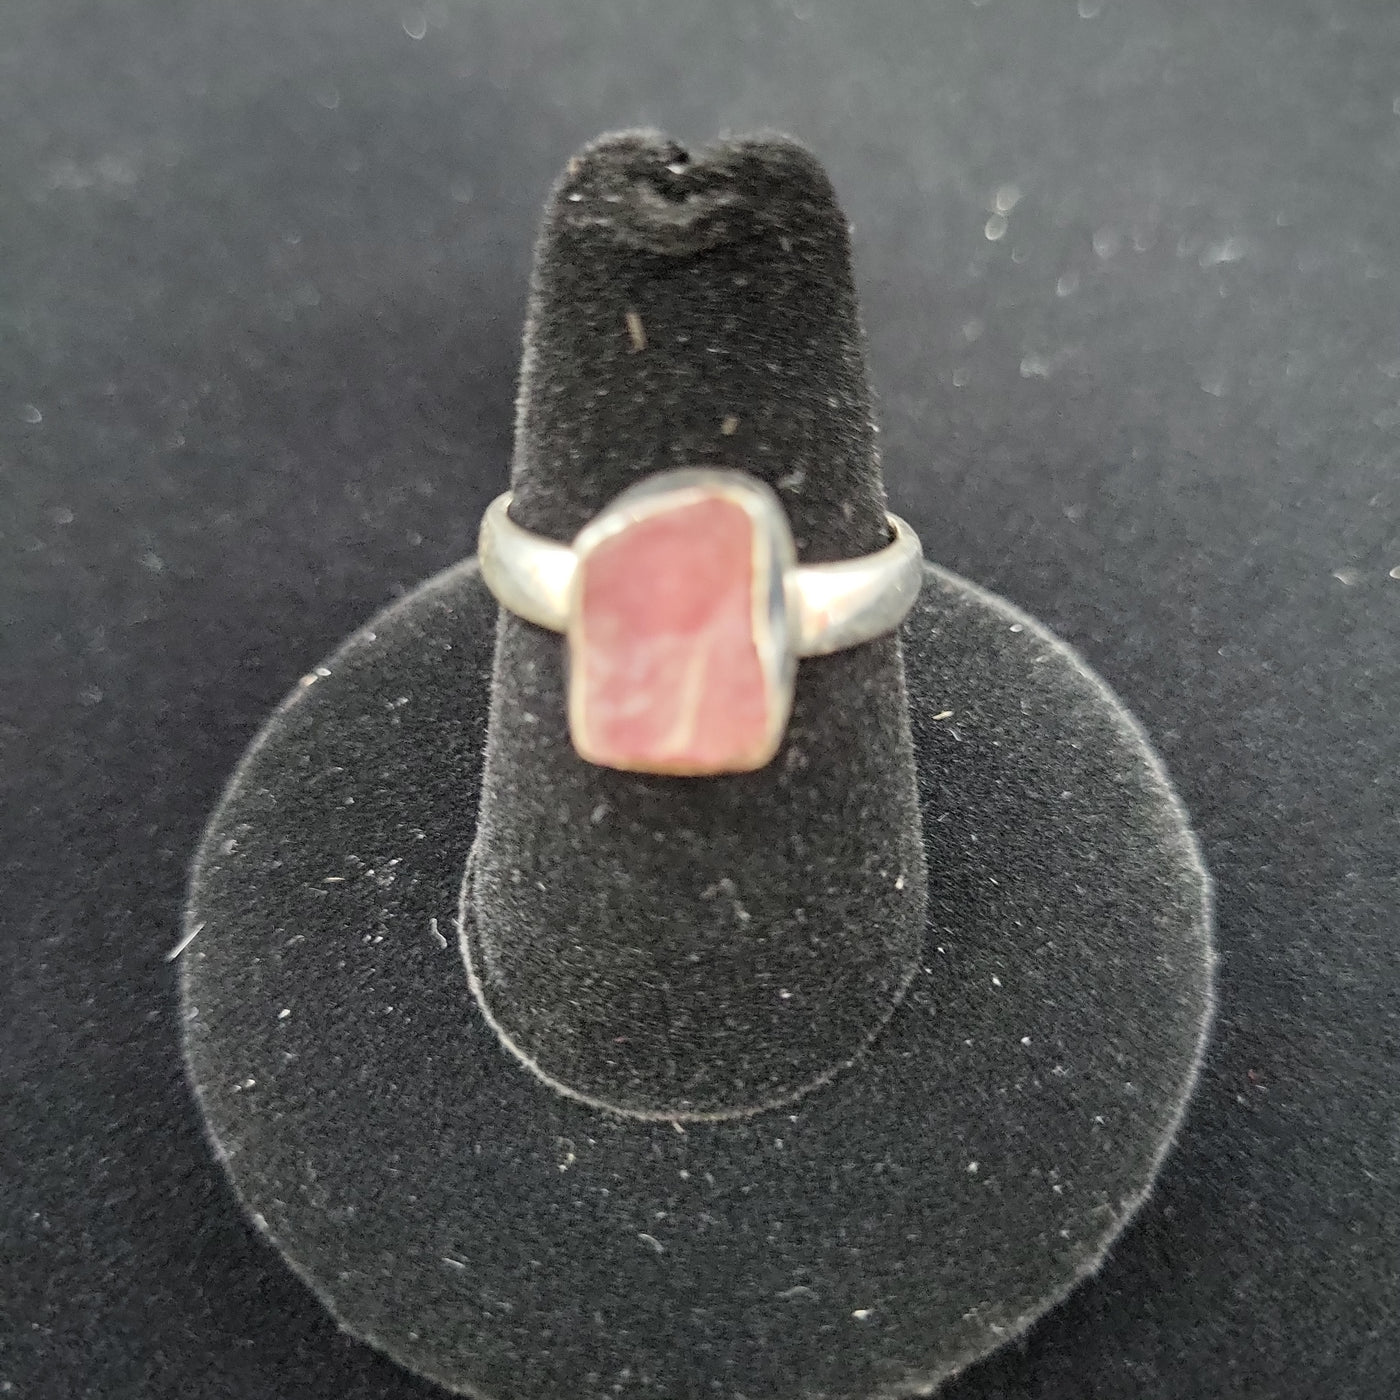 Sz 7.5 Pink Tourmaline Free Form Ring 925 Sterling Silver